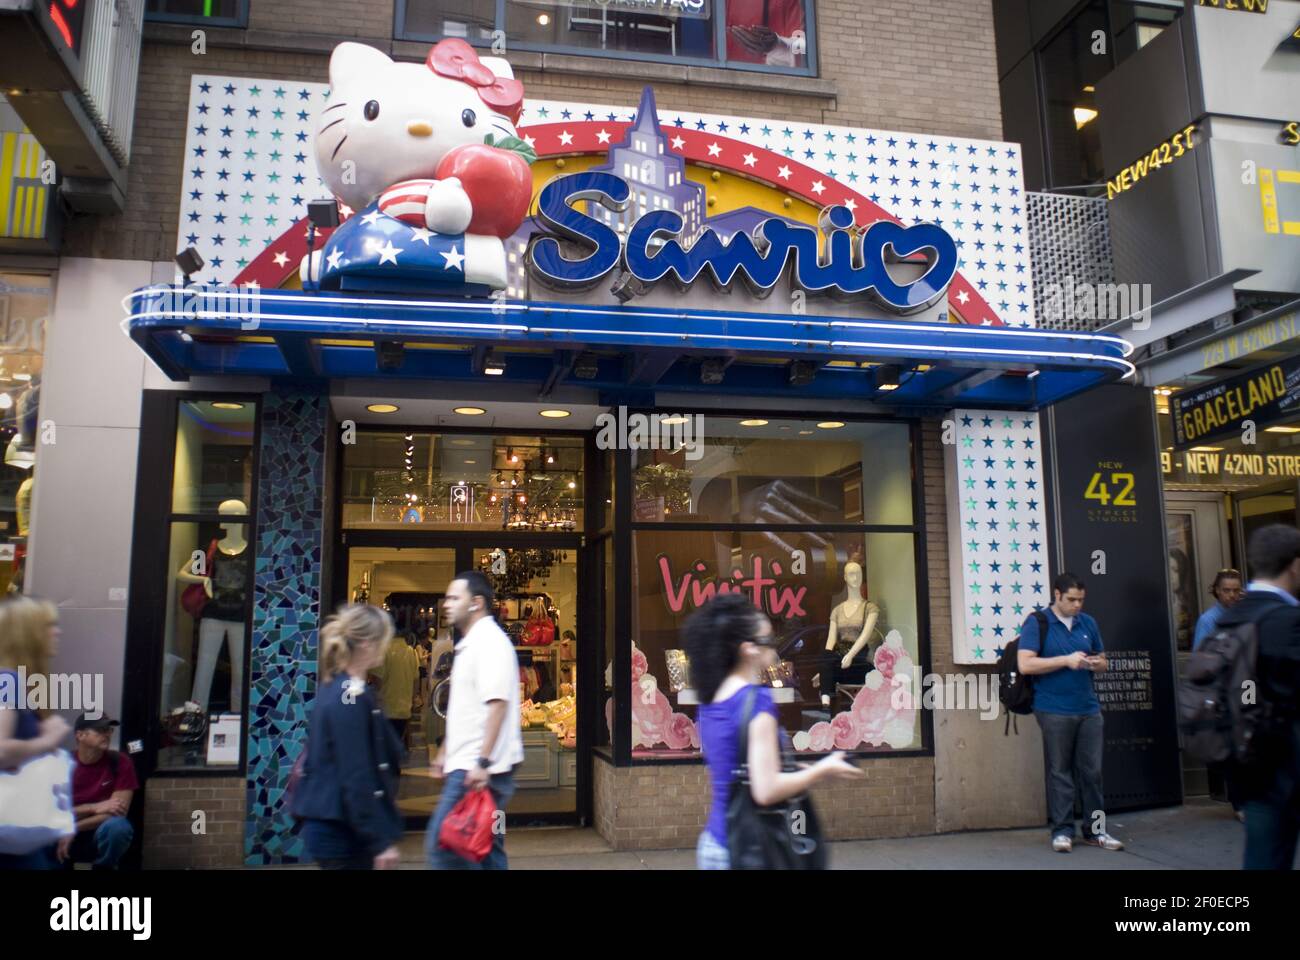 Hello Kitty brand merchandise at the Sanrio store in Times Square in New  York on Saturday, May 15, 2010. The European Union has fined Sanrio Co. 6.2  million euros over its illegal